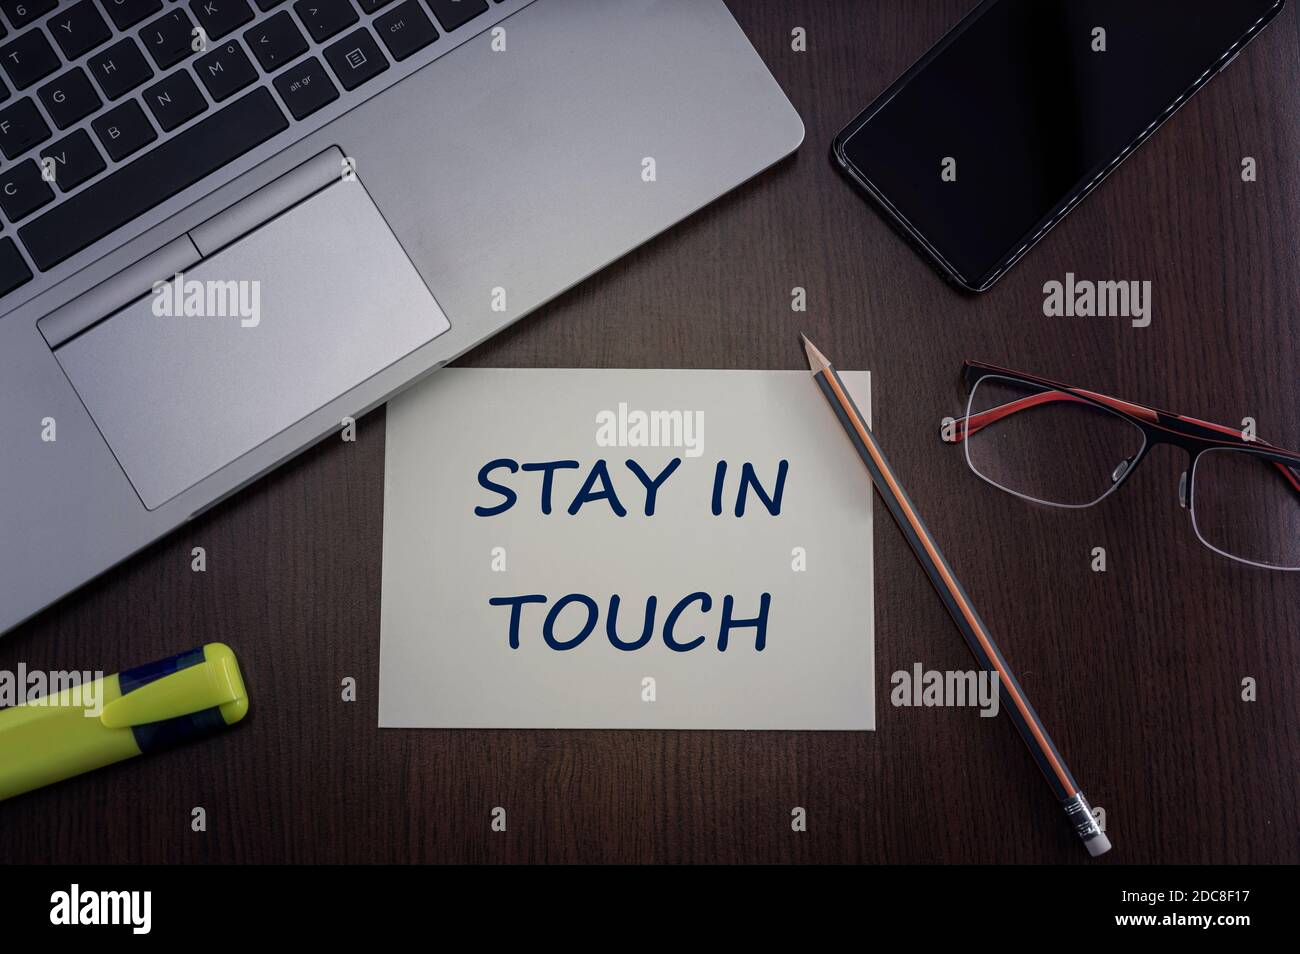 Top view of laptop, phone, glasses and pencil with card with inscription stay in touch. Stock Photo